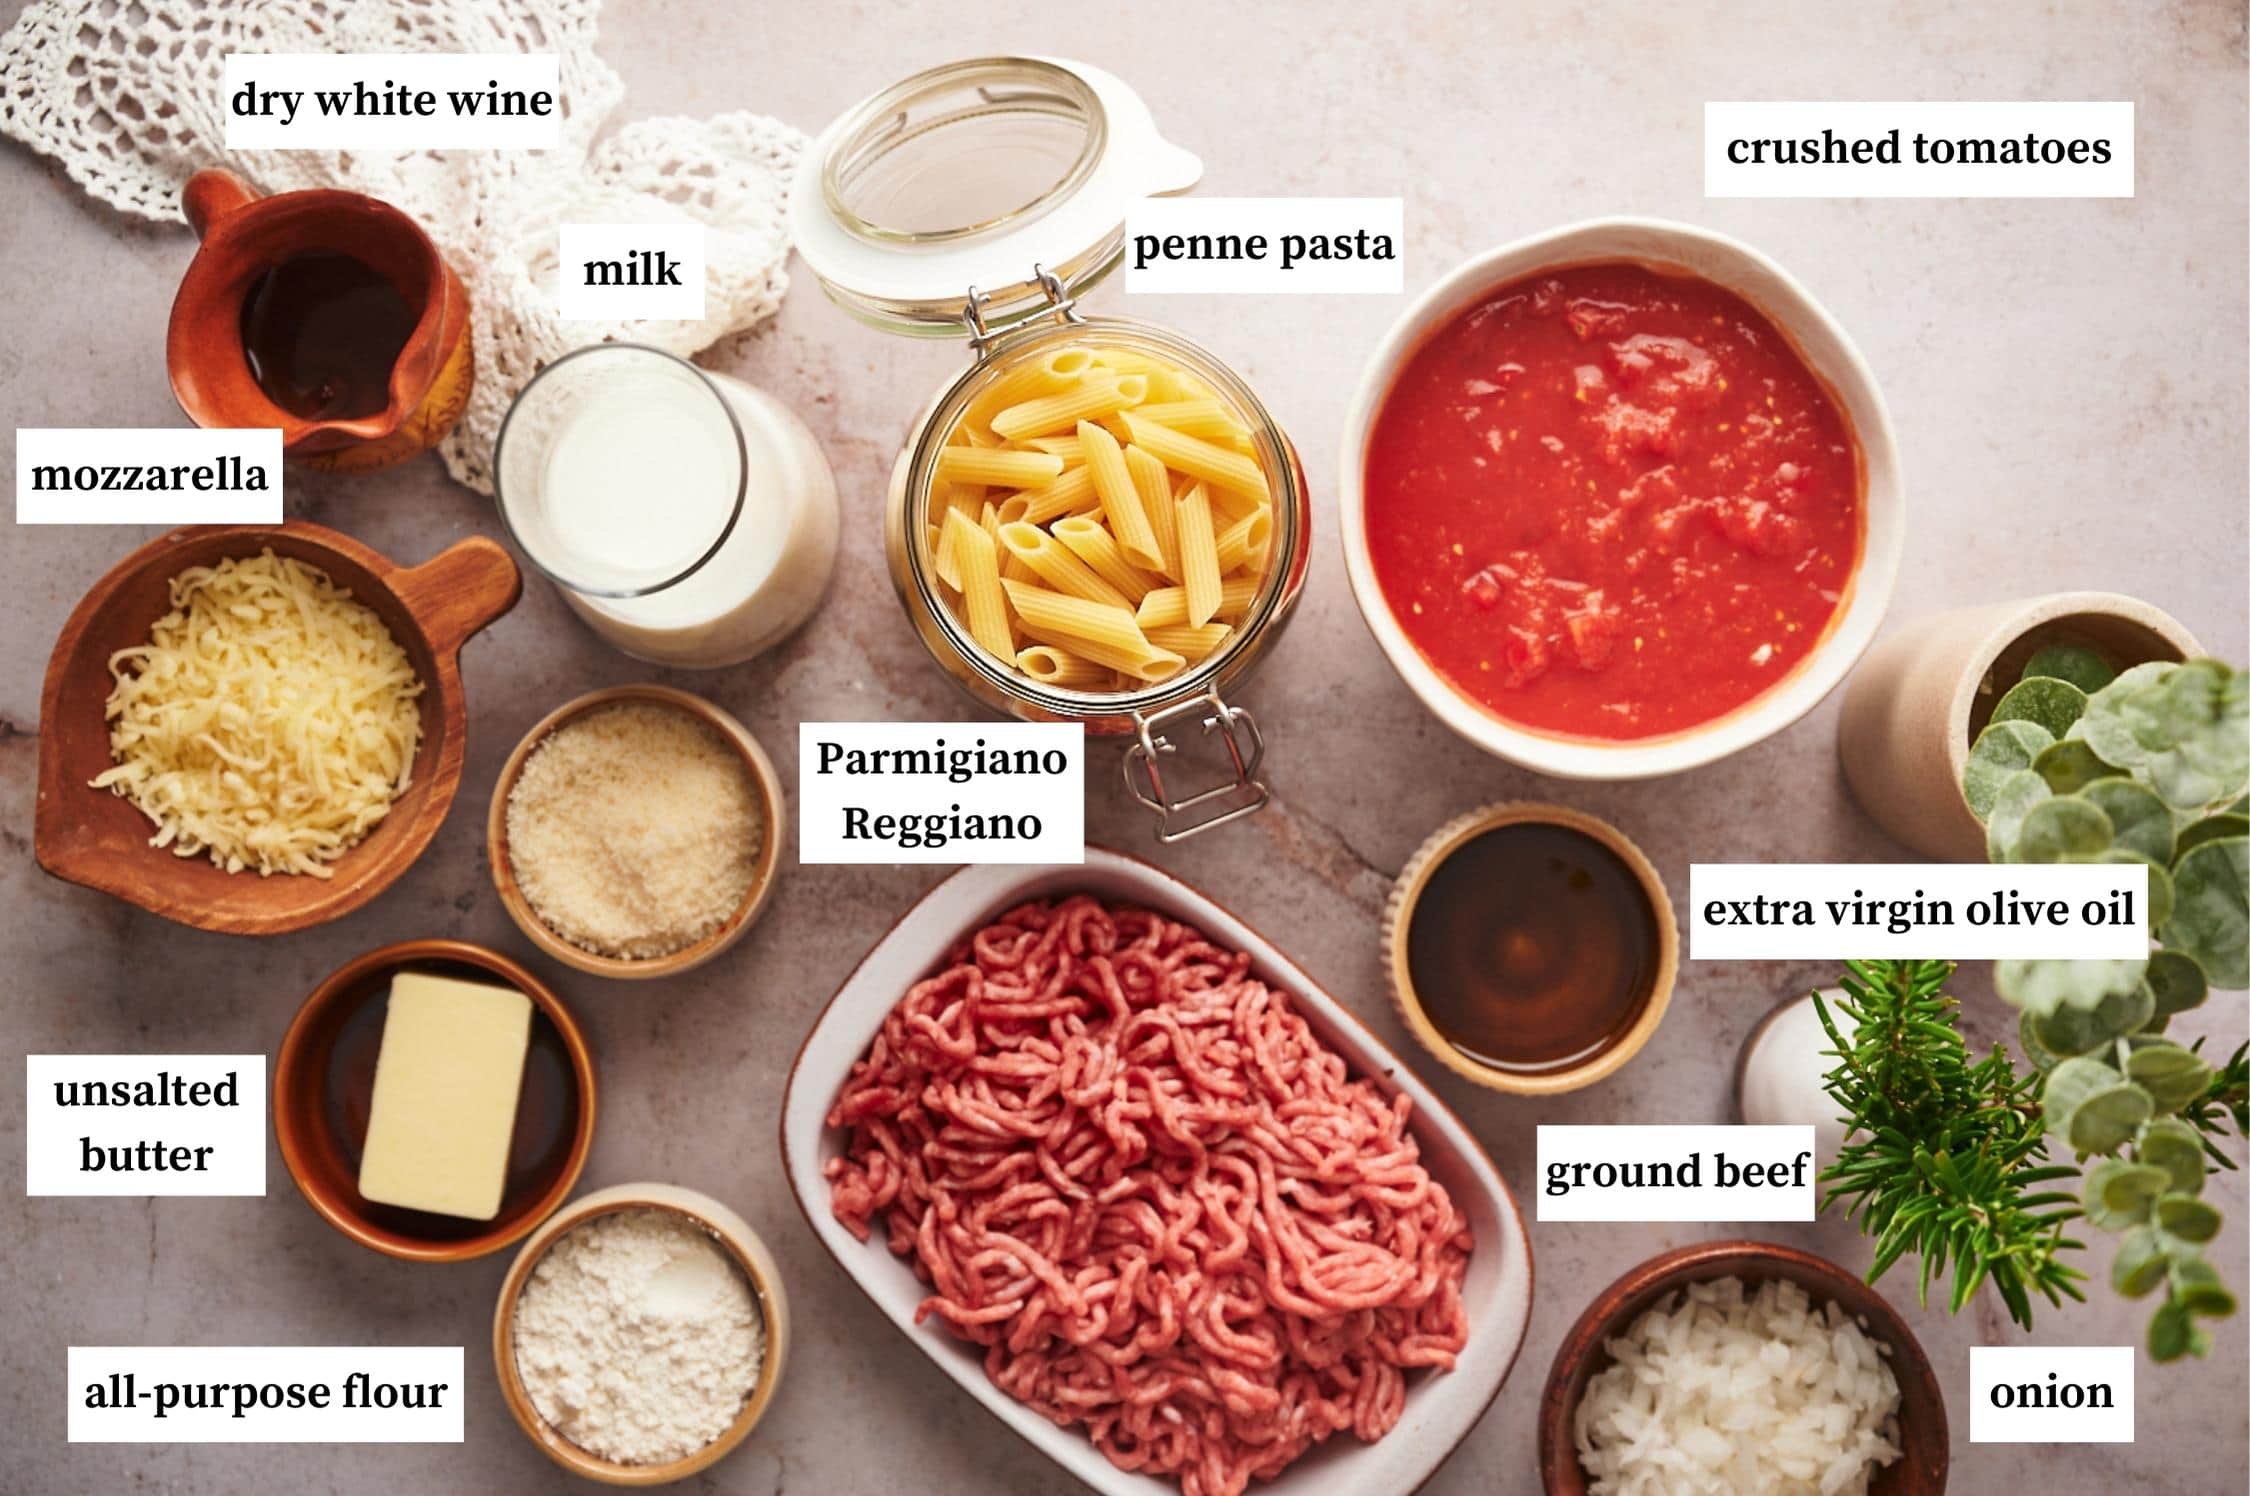 baked penne ingredients: small pitcher of dry white wine, jar of milk, jar of penne pasta, bowl of crushed tomatoes, bowl of mozzarella, parmigiano reggiano, unsalted butter, extra virgin olive oil, rectangular dish with ground beef in it, bowl of all-purpose flour and onions.